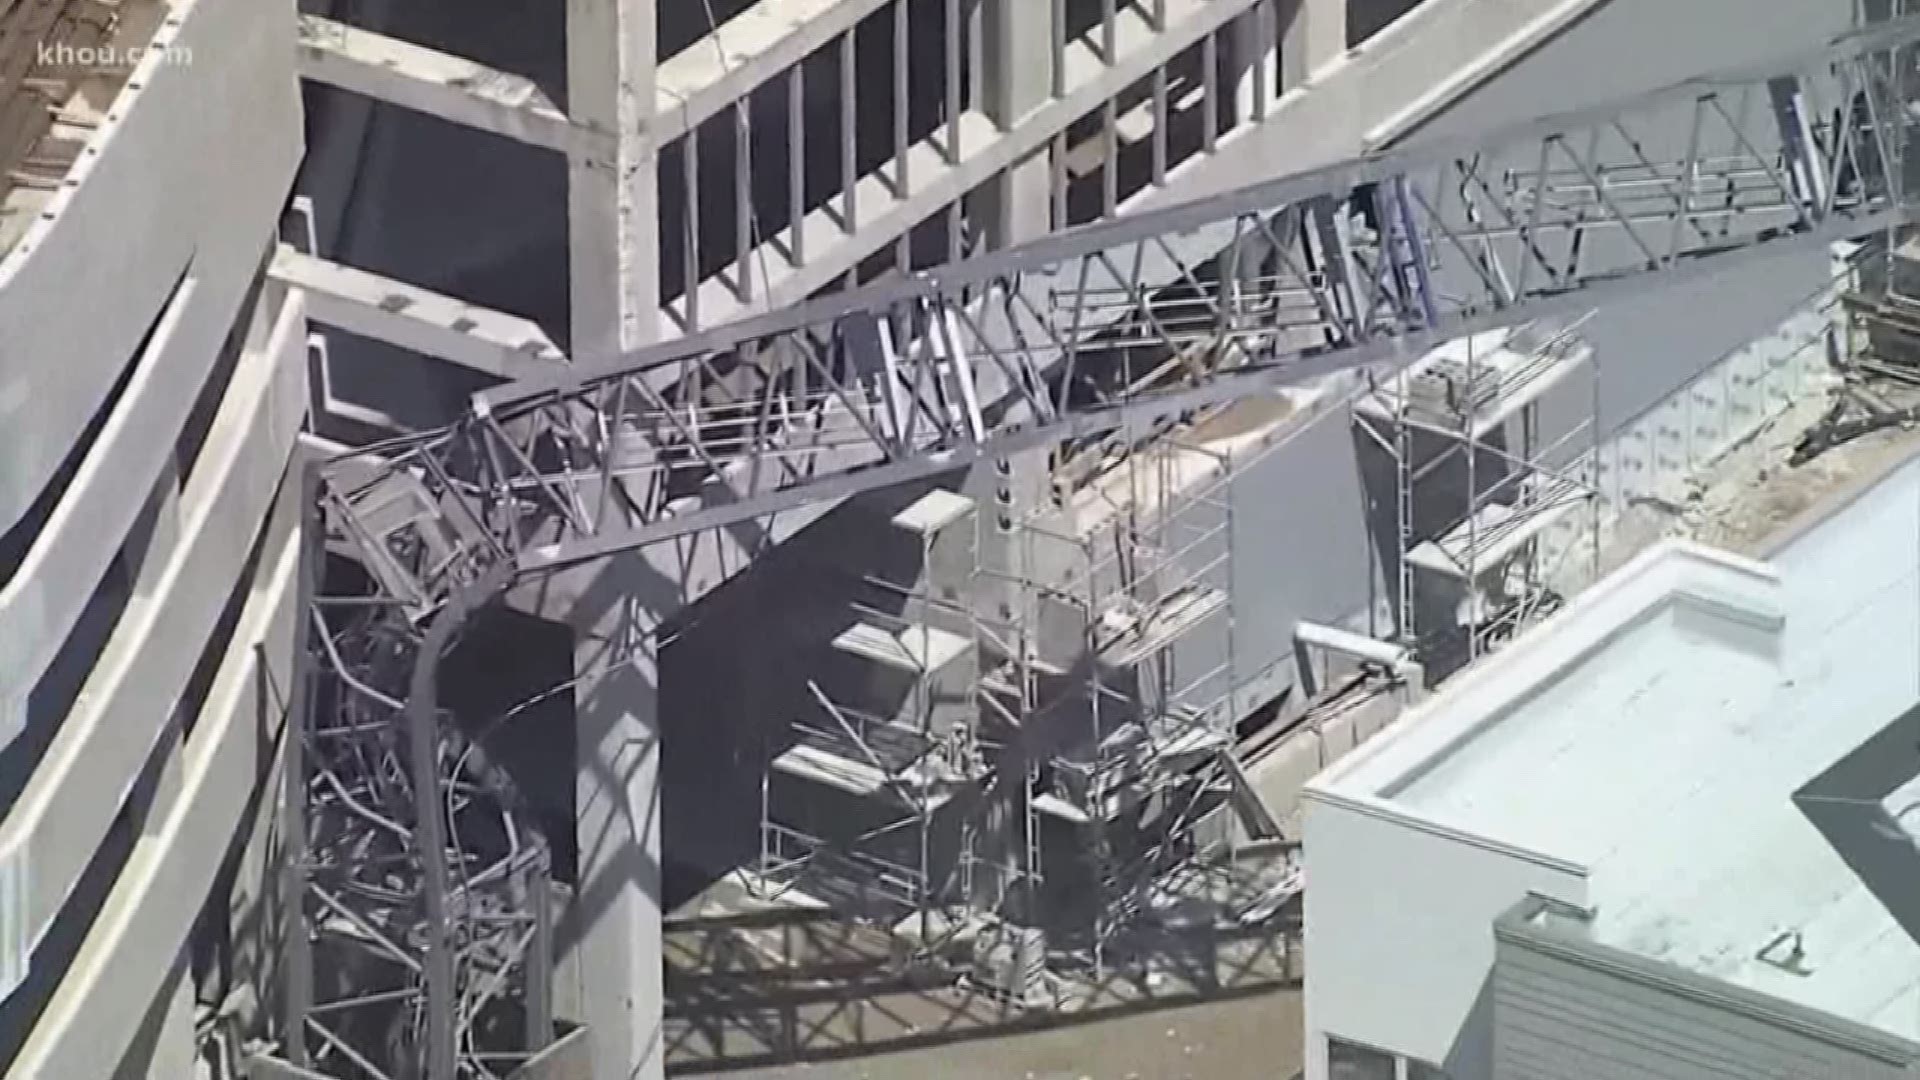 Federal safety regulators opened up an investigation into the crane collapse which killed Houston-native Kiersten Smith during Sunday’s windstorm in Dallas. The crane's California-based owner was involved in a deadly collapse in Arkansas in 2013. The question just how often does this kind of thing happen?